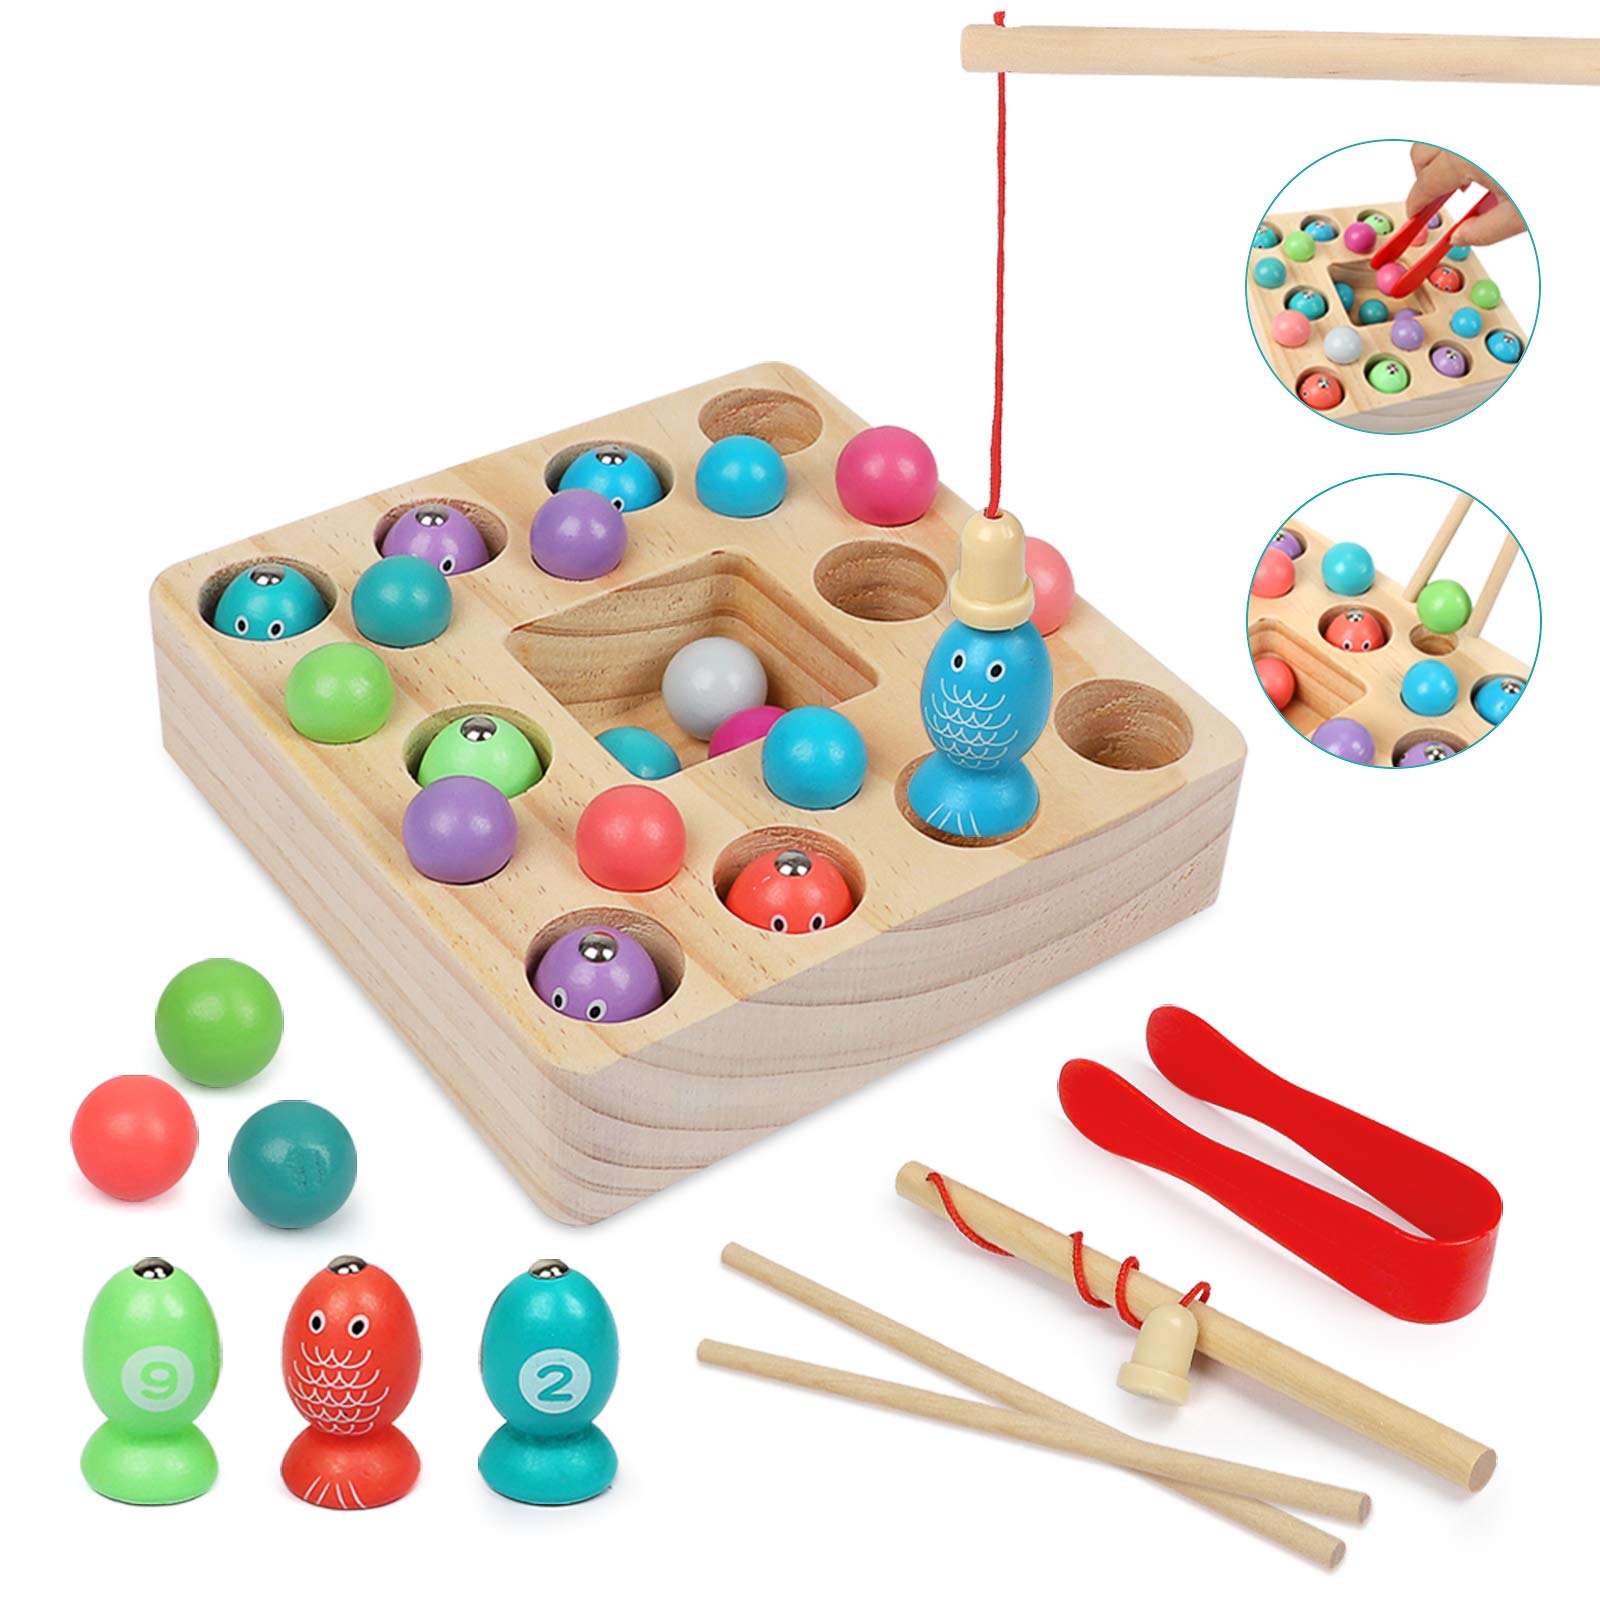 Trending Products Small Plastic Toys - LBLA 3 in 1 Wooden Magnetic Fishing Game Board Clip Bead Game Fine Motor Skill Toy Number Blocks Puzzle Montessori Educational Toys for Kids with 2 Fishing R...